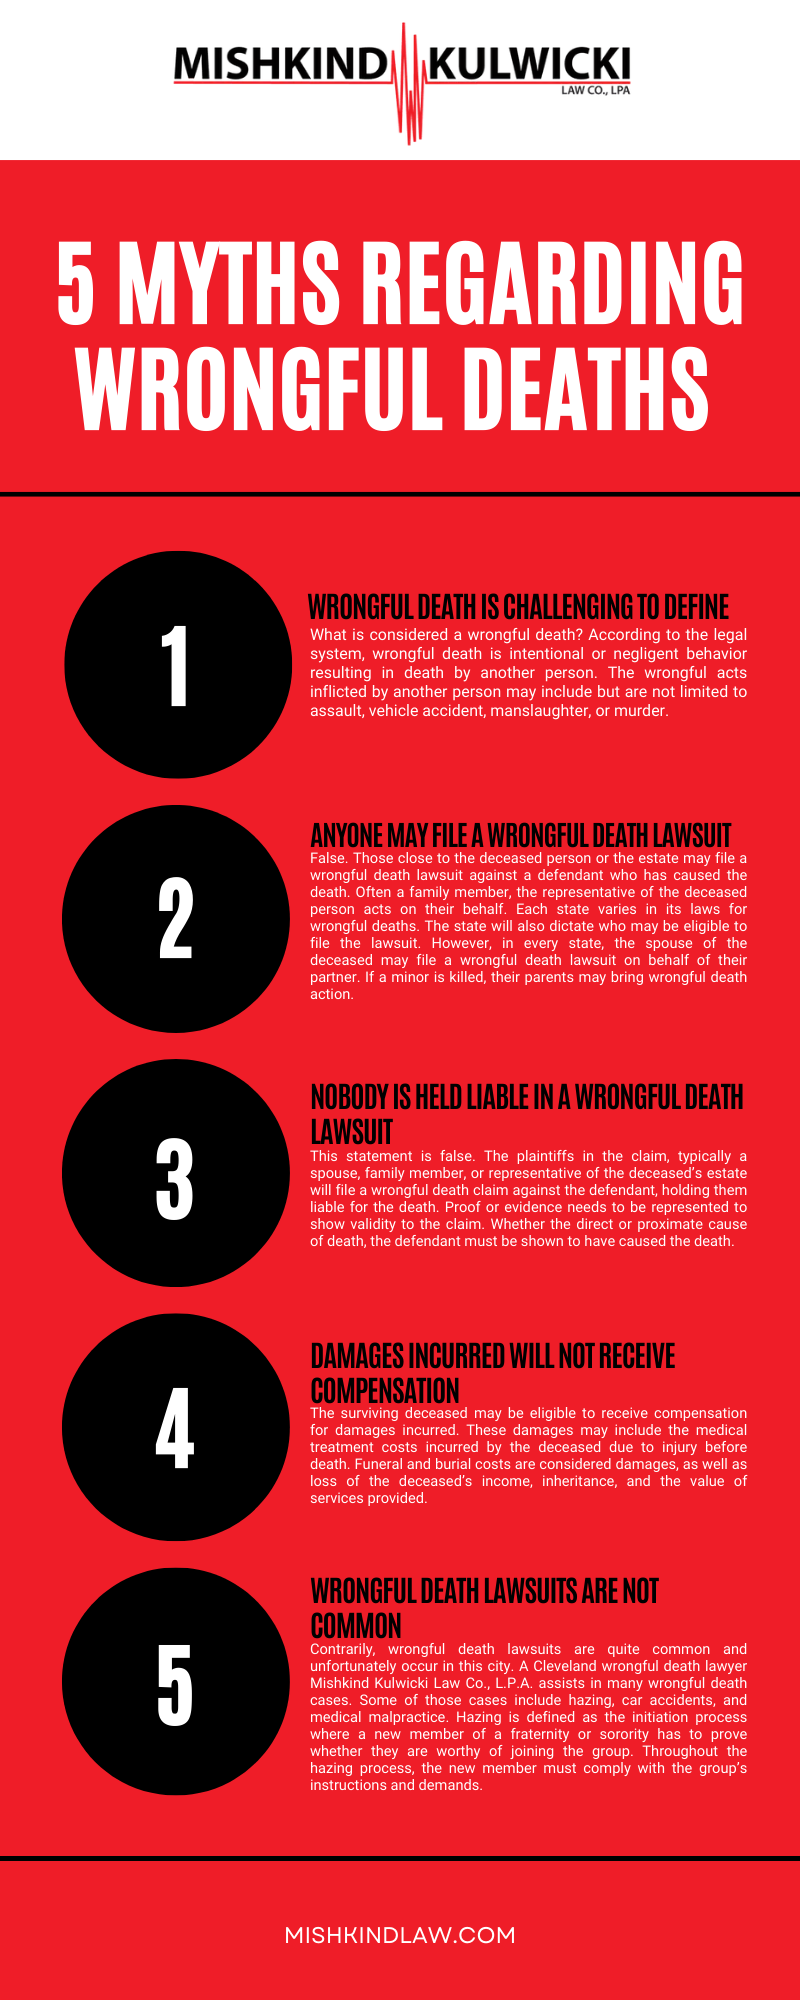 5 MYTHS REGARDING WRONGFUL DEATHS INFOGRAPHIC